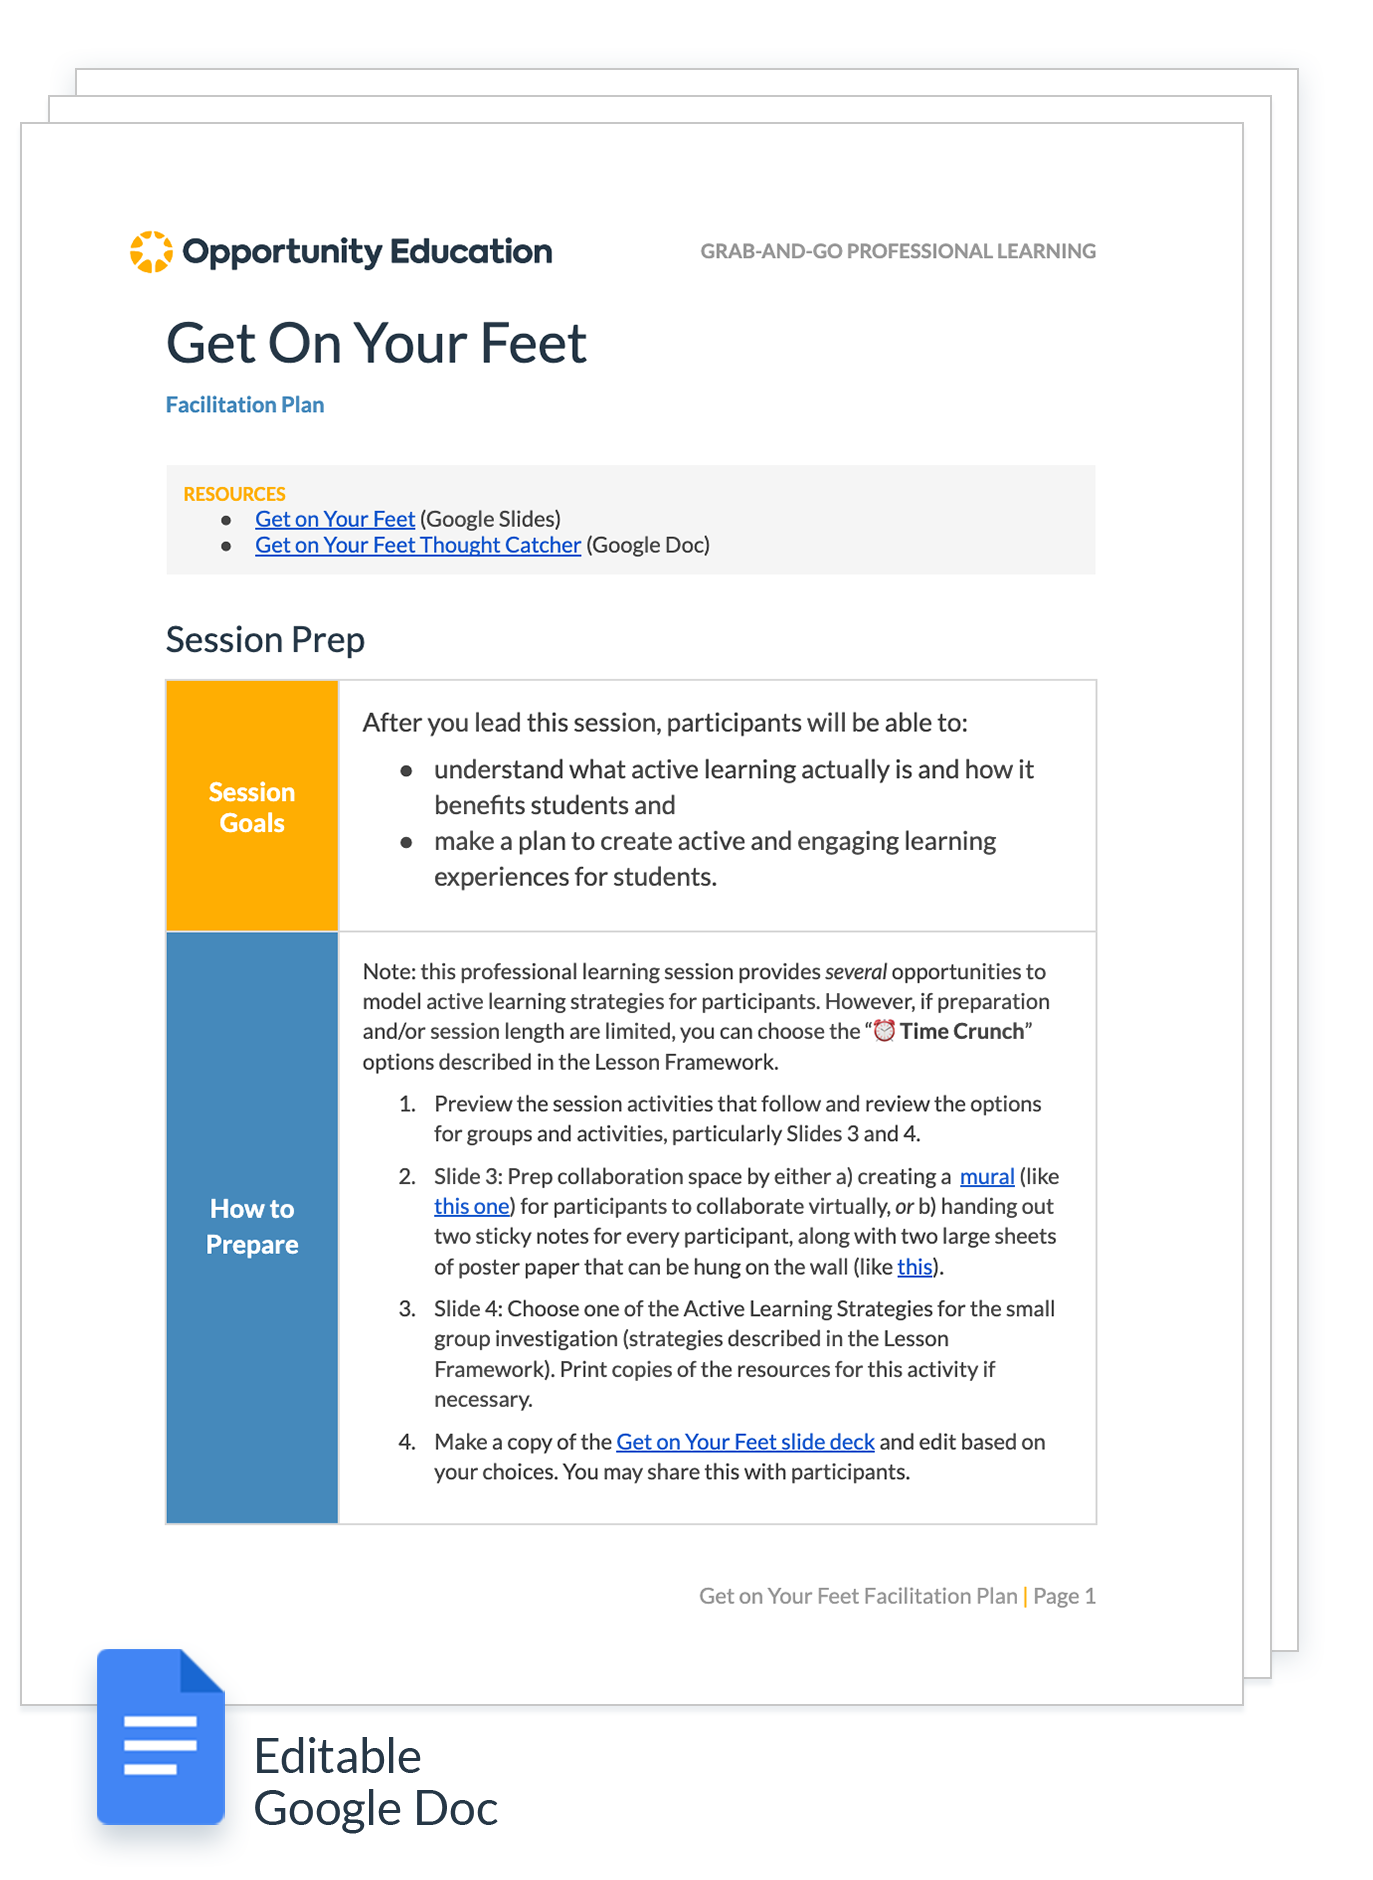 A preview of the teacher professional learning resource "Get on Your Feet" by Opportunity Education